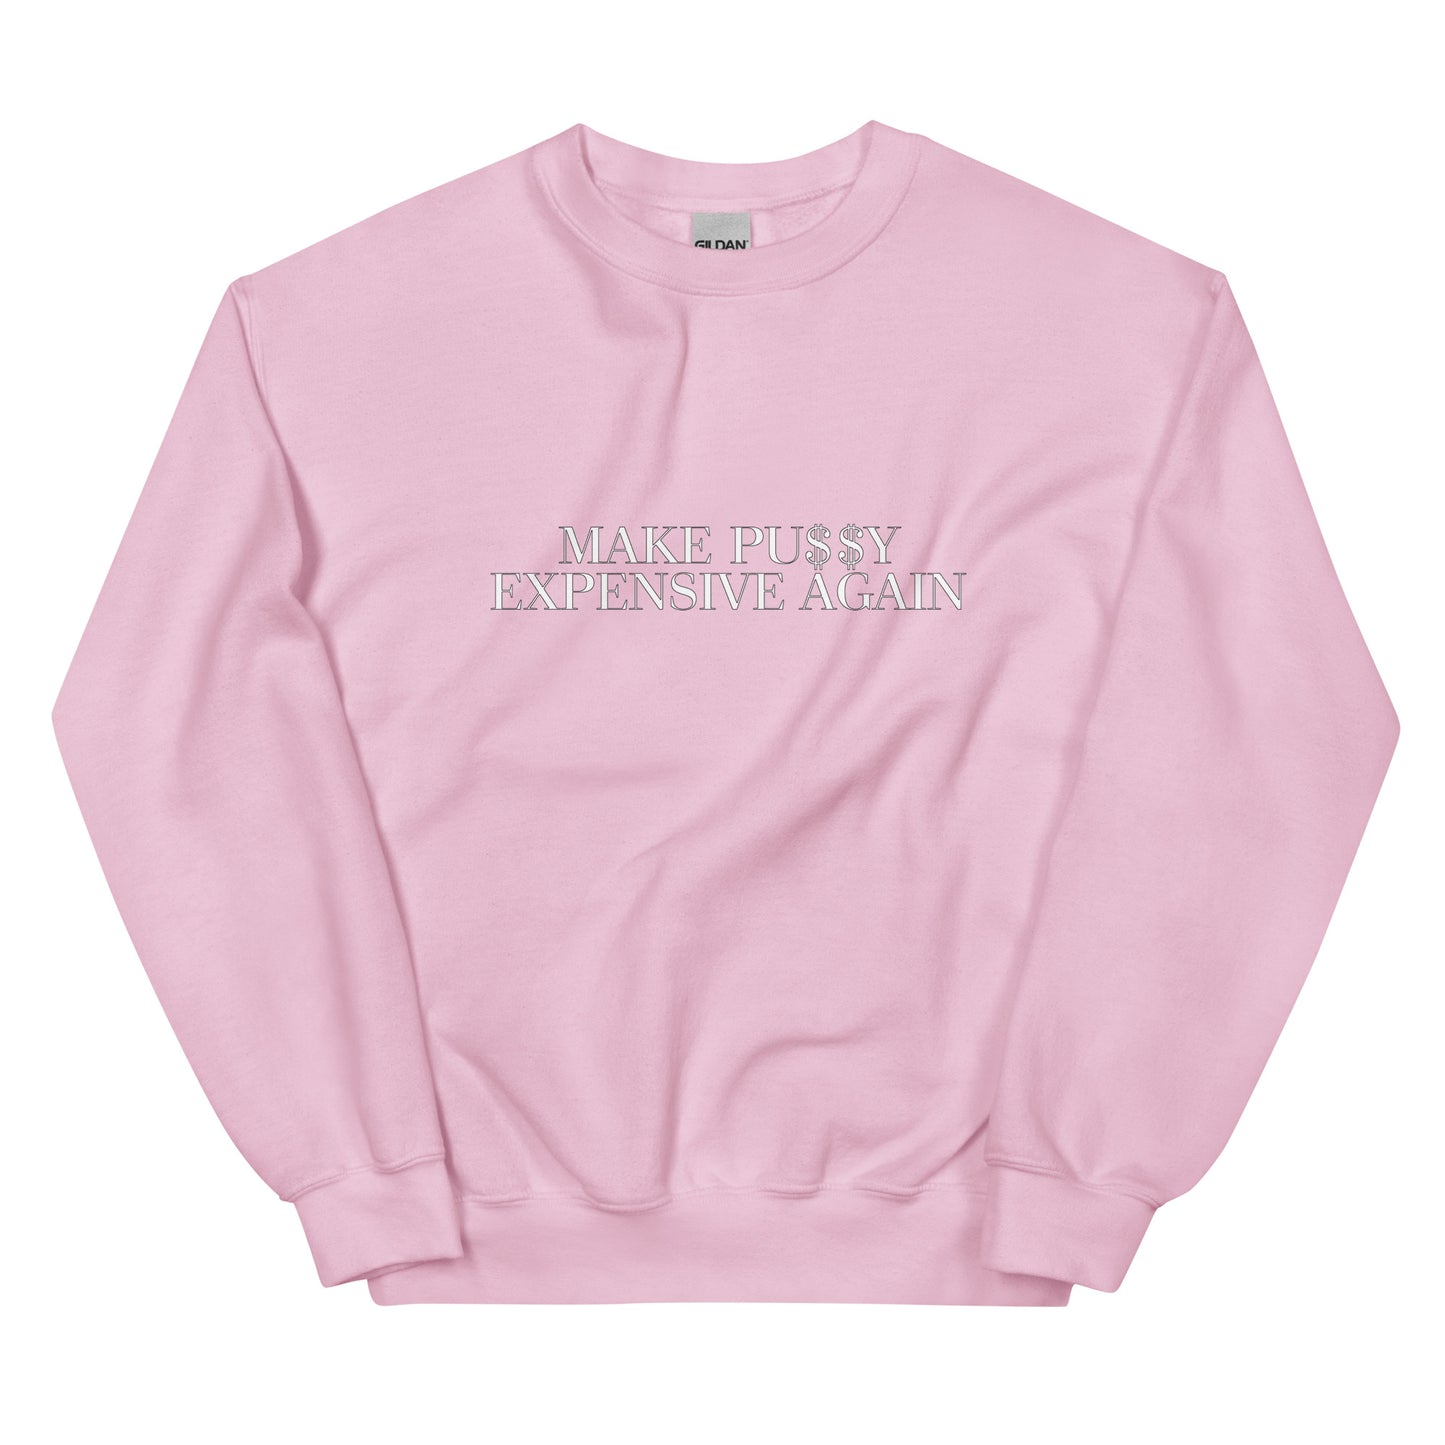 Make PU$$Y Expensive Again(Crew Neck)